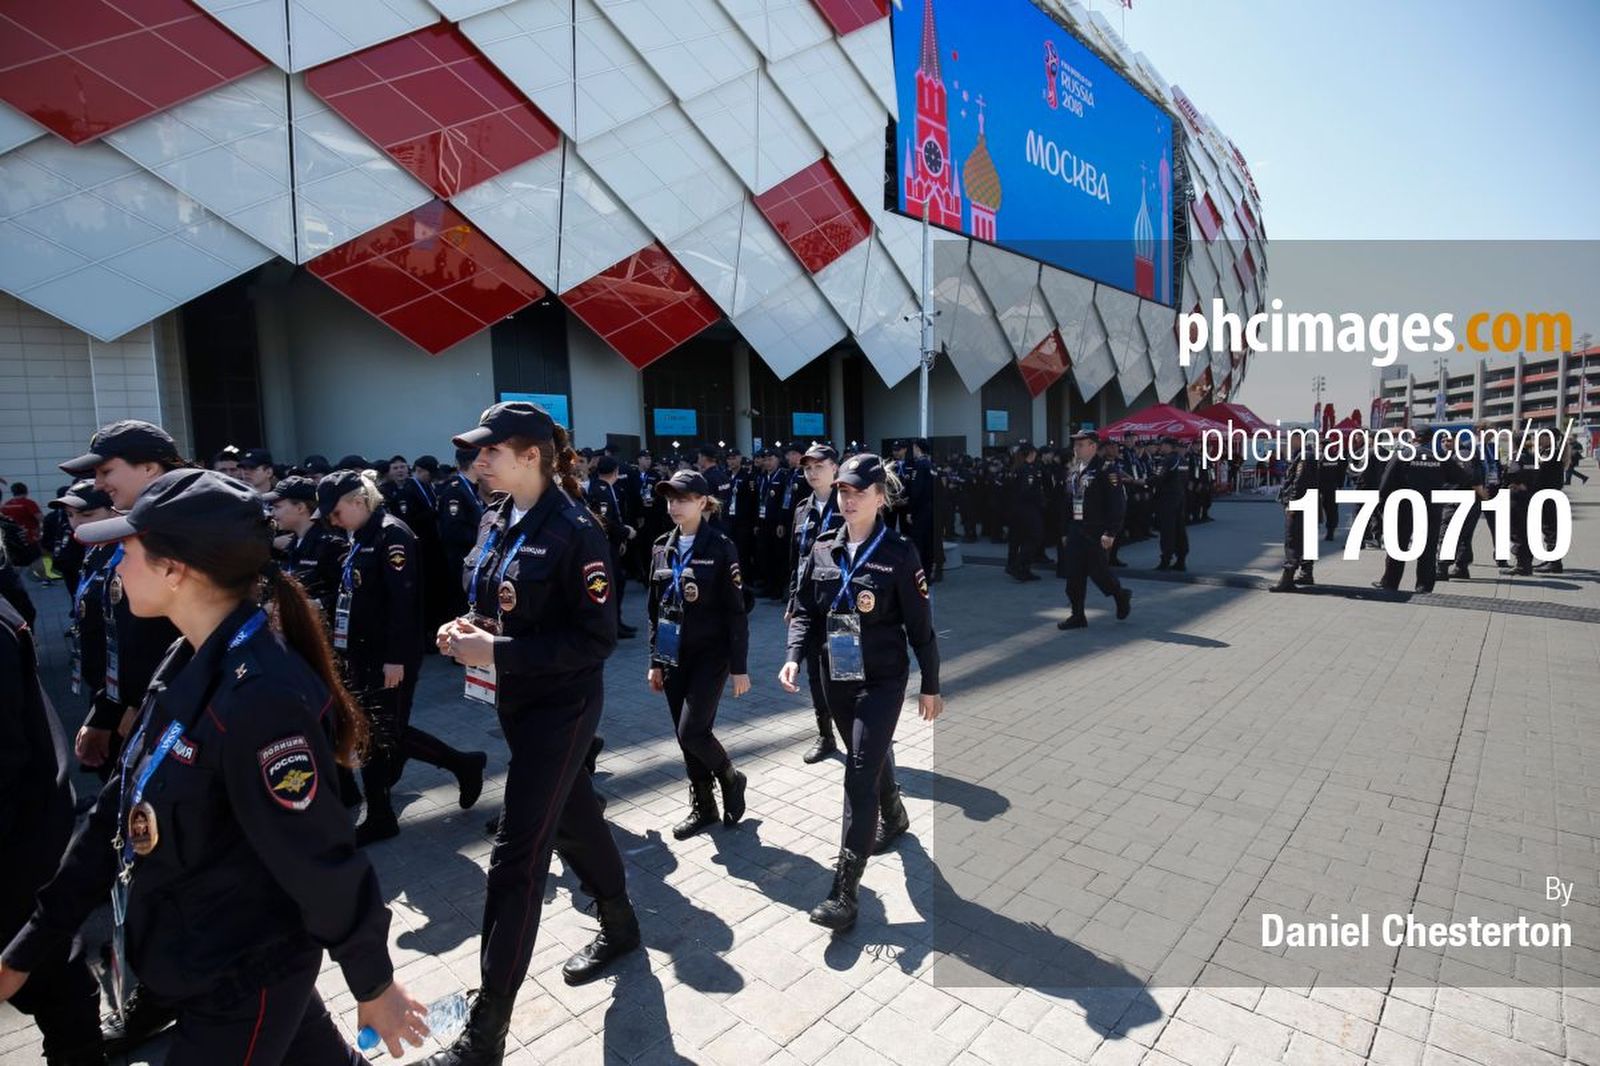 Security forces prepare before the match